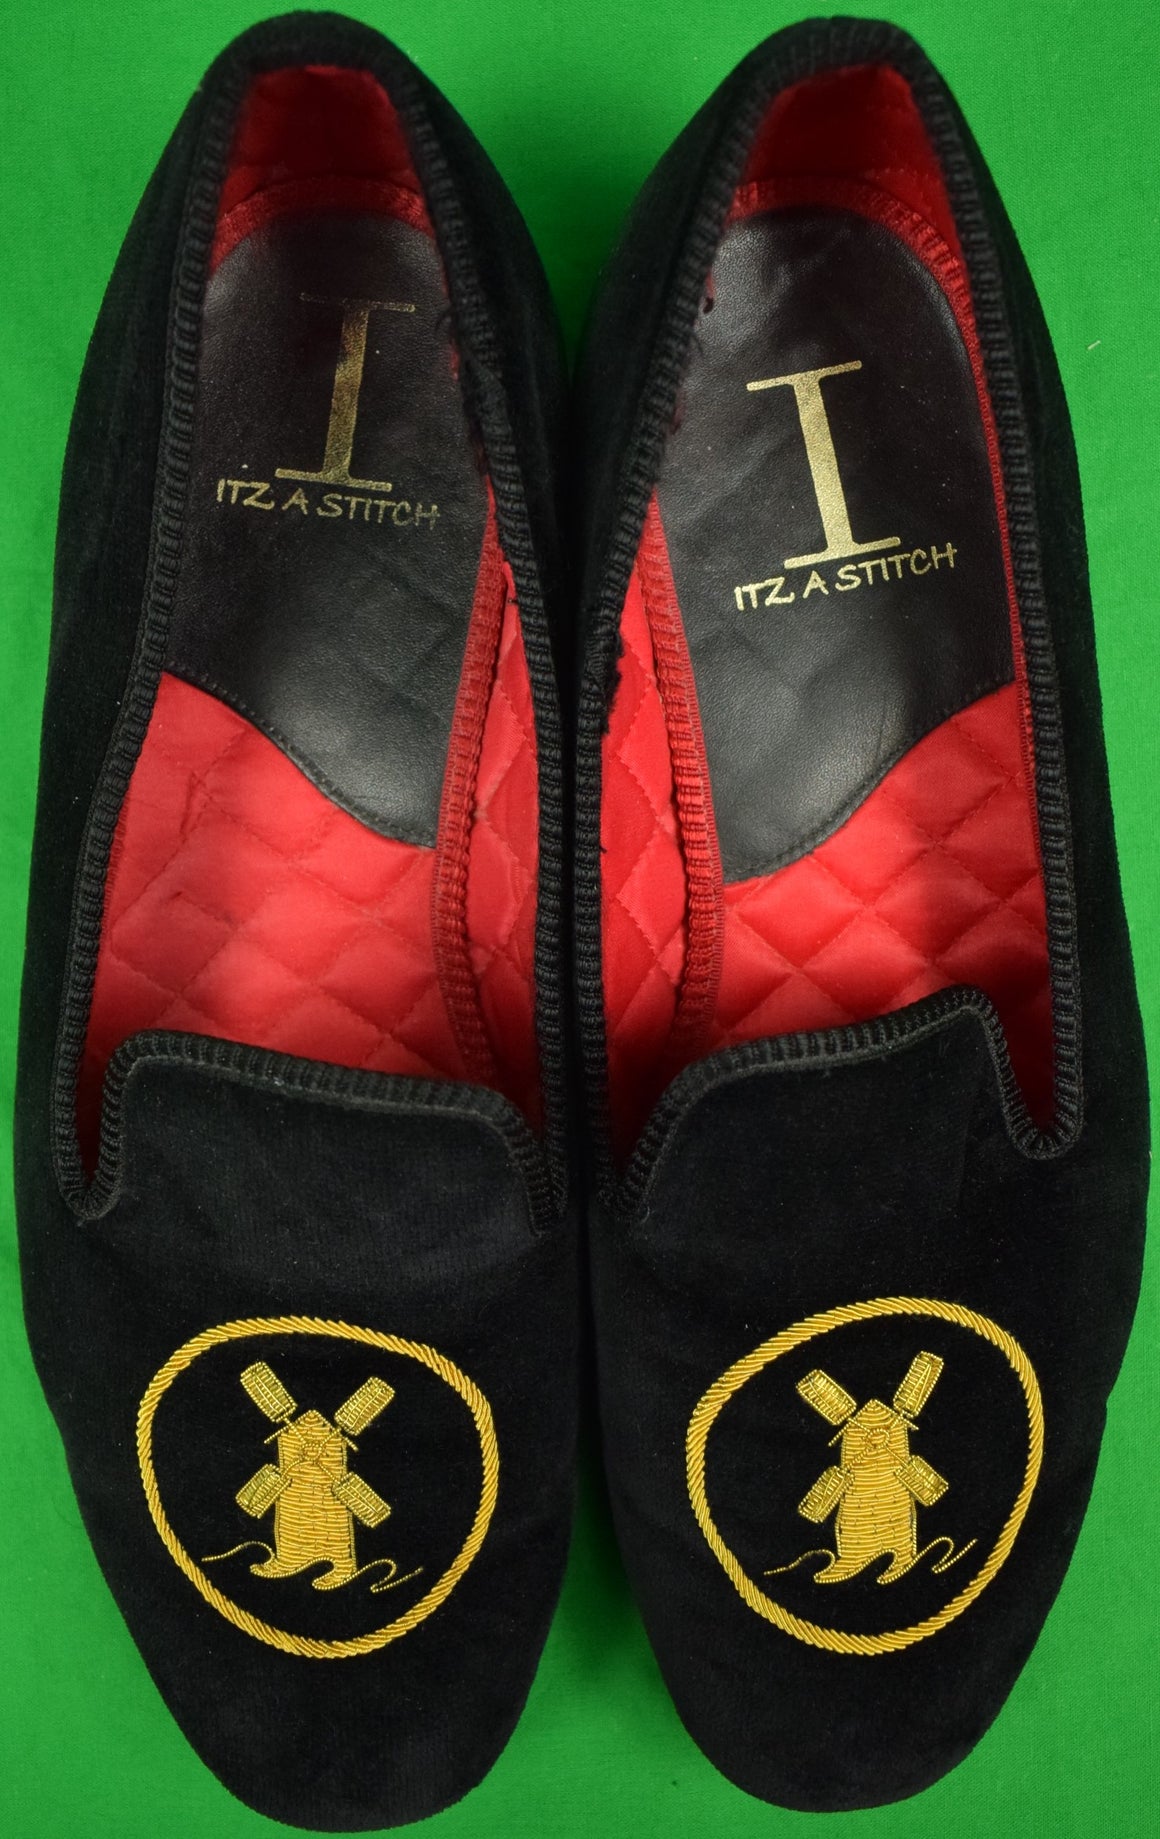 "The Mill Reef Club Antigua Black Velvet Slippers Hand Made in England" Sz: 9.5L/10R